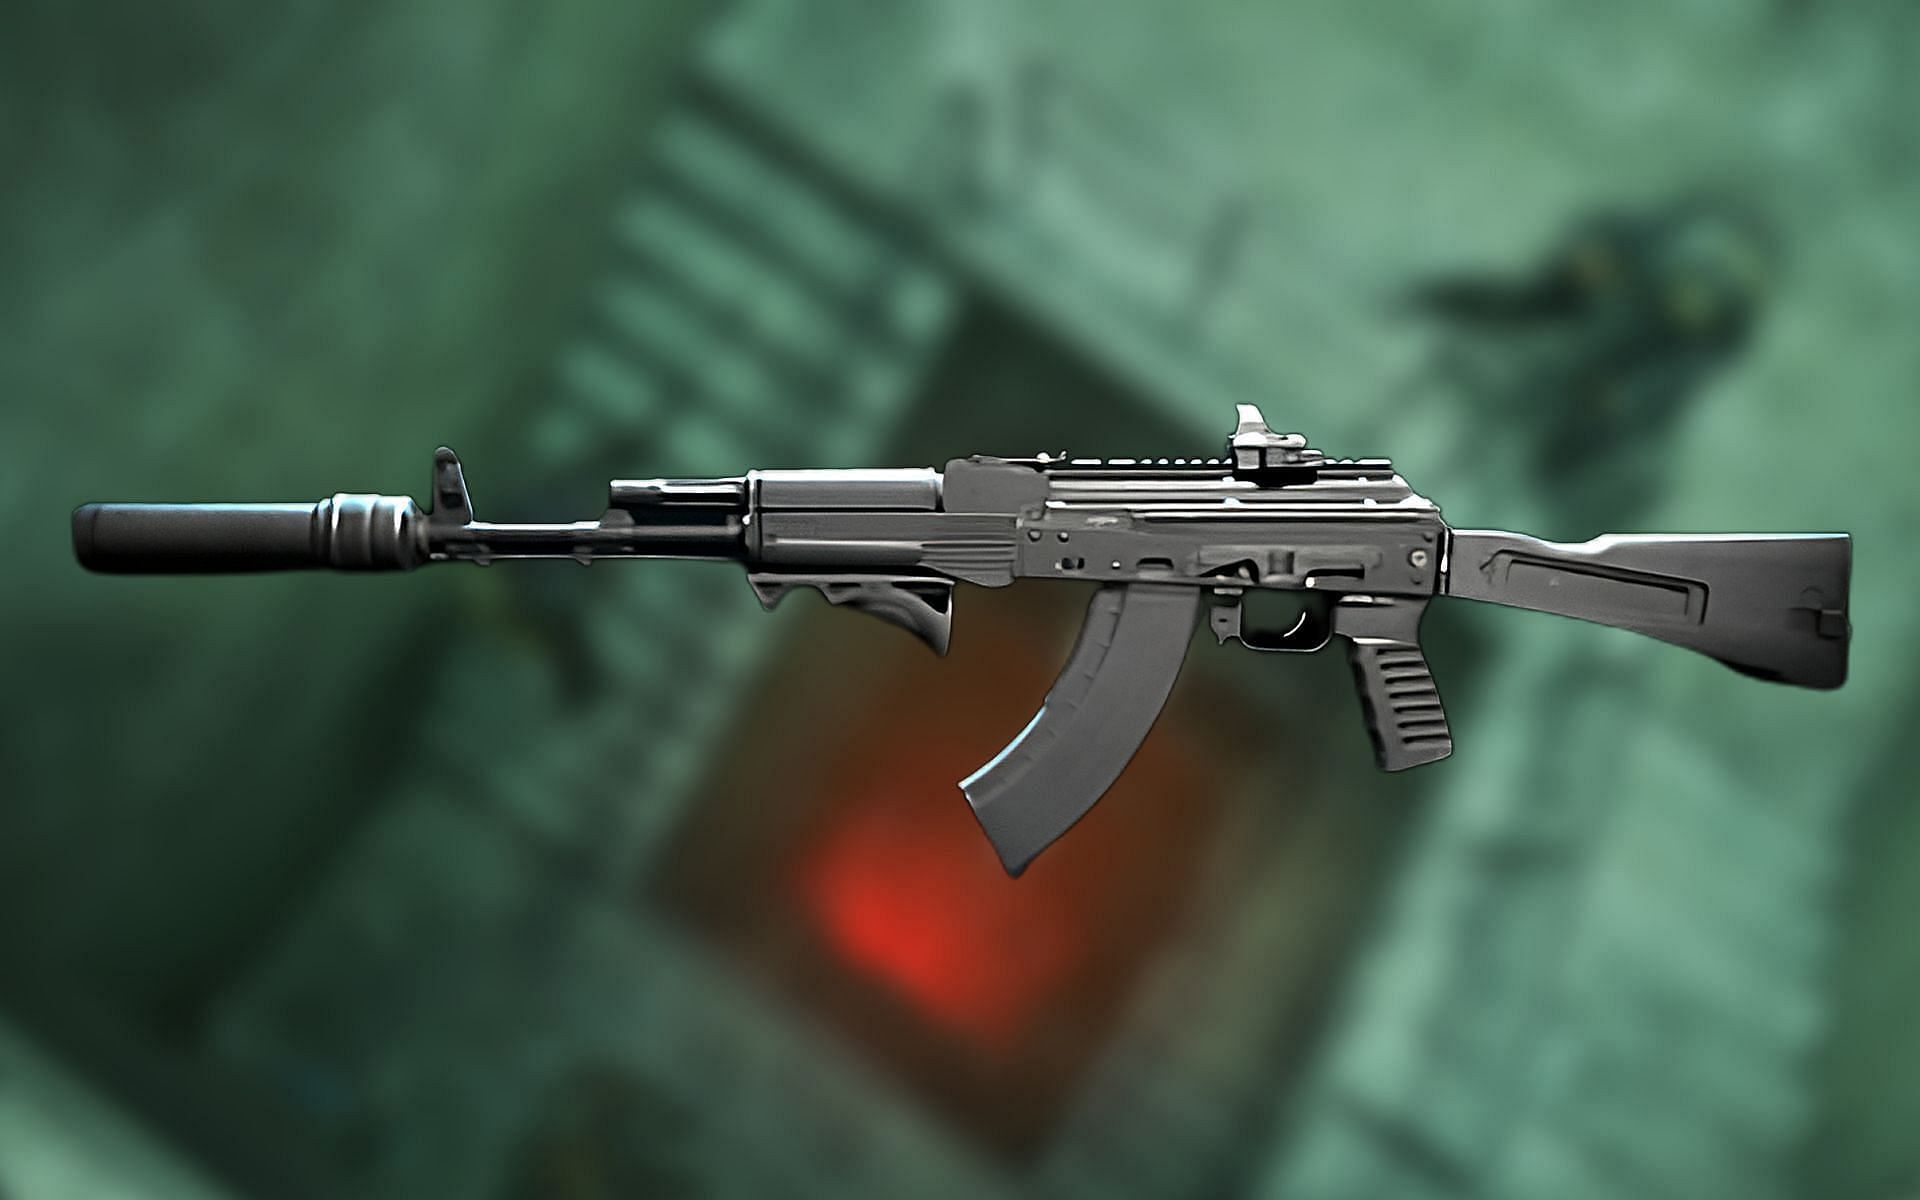 Kastov 762 is the most lethal AR in Warzone 2 Season 1 Reloaded (Image via Activision and edited by Sportskeeda)